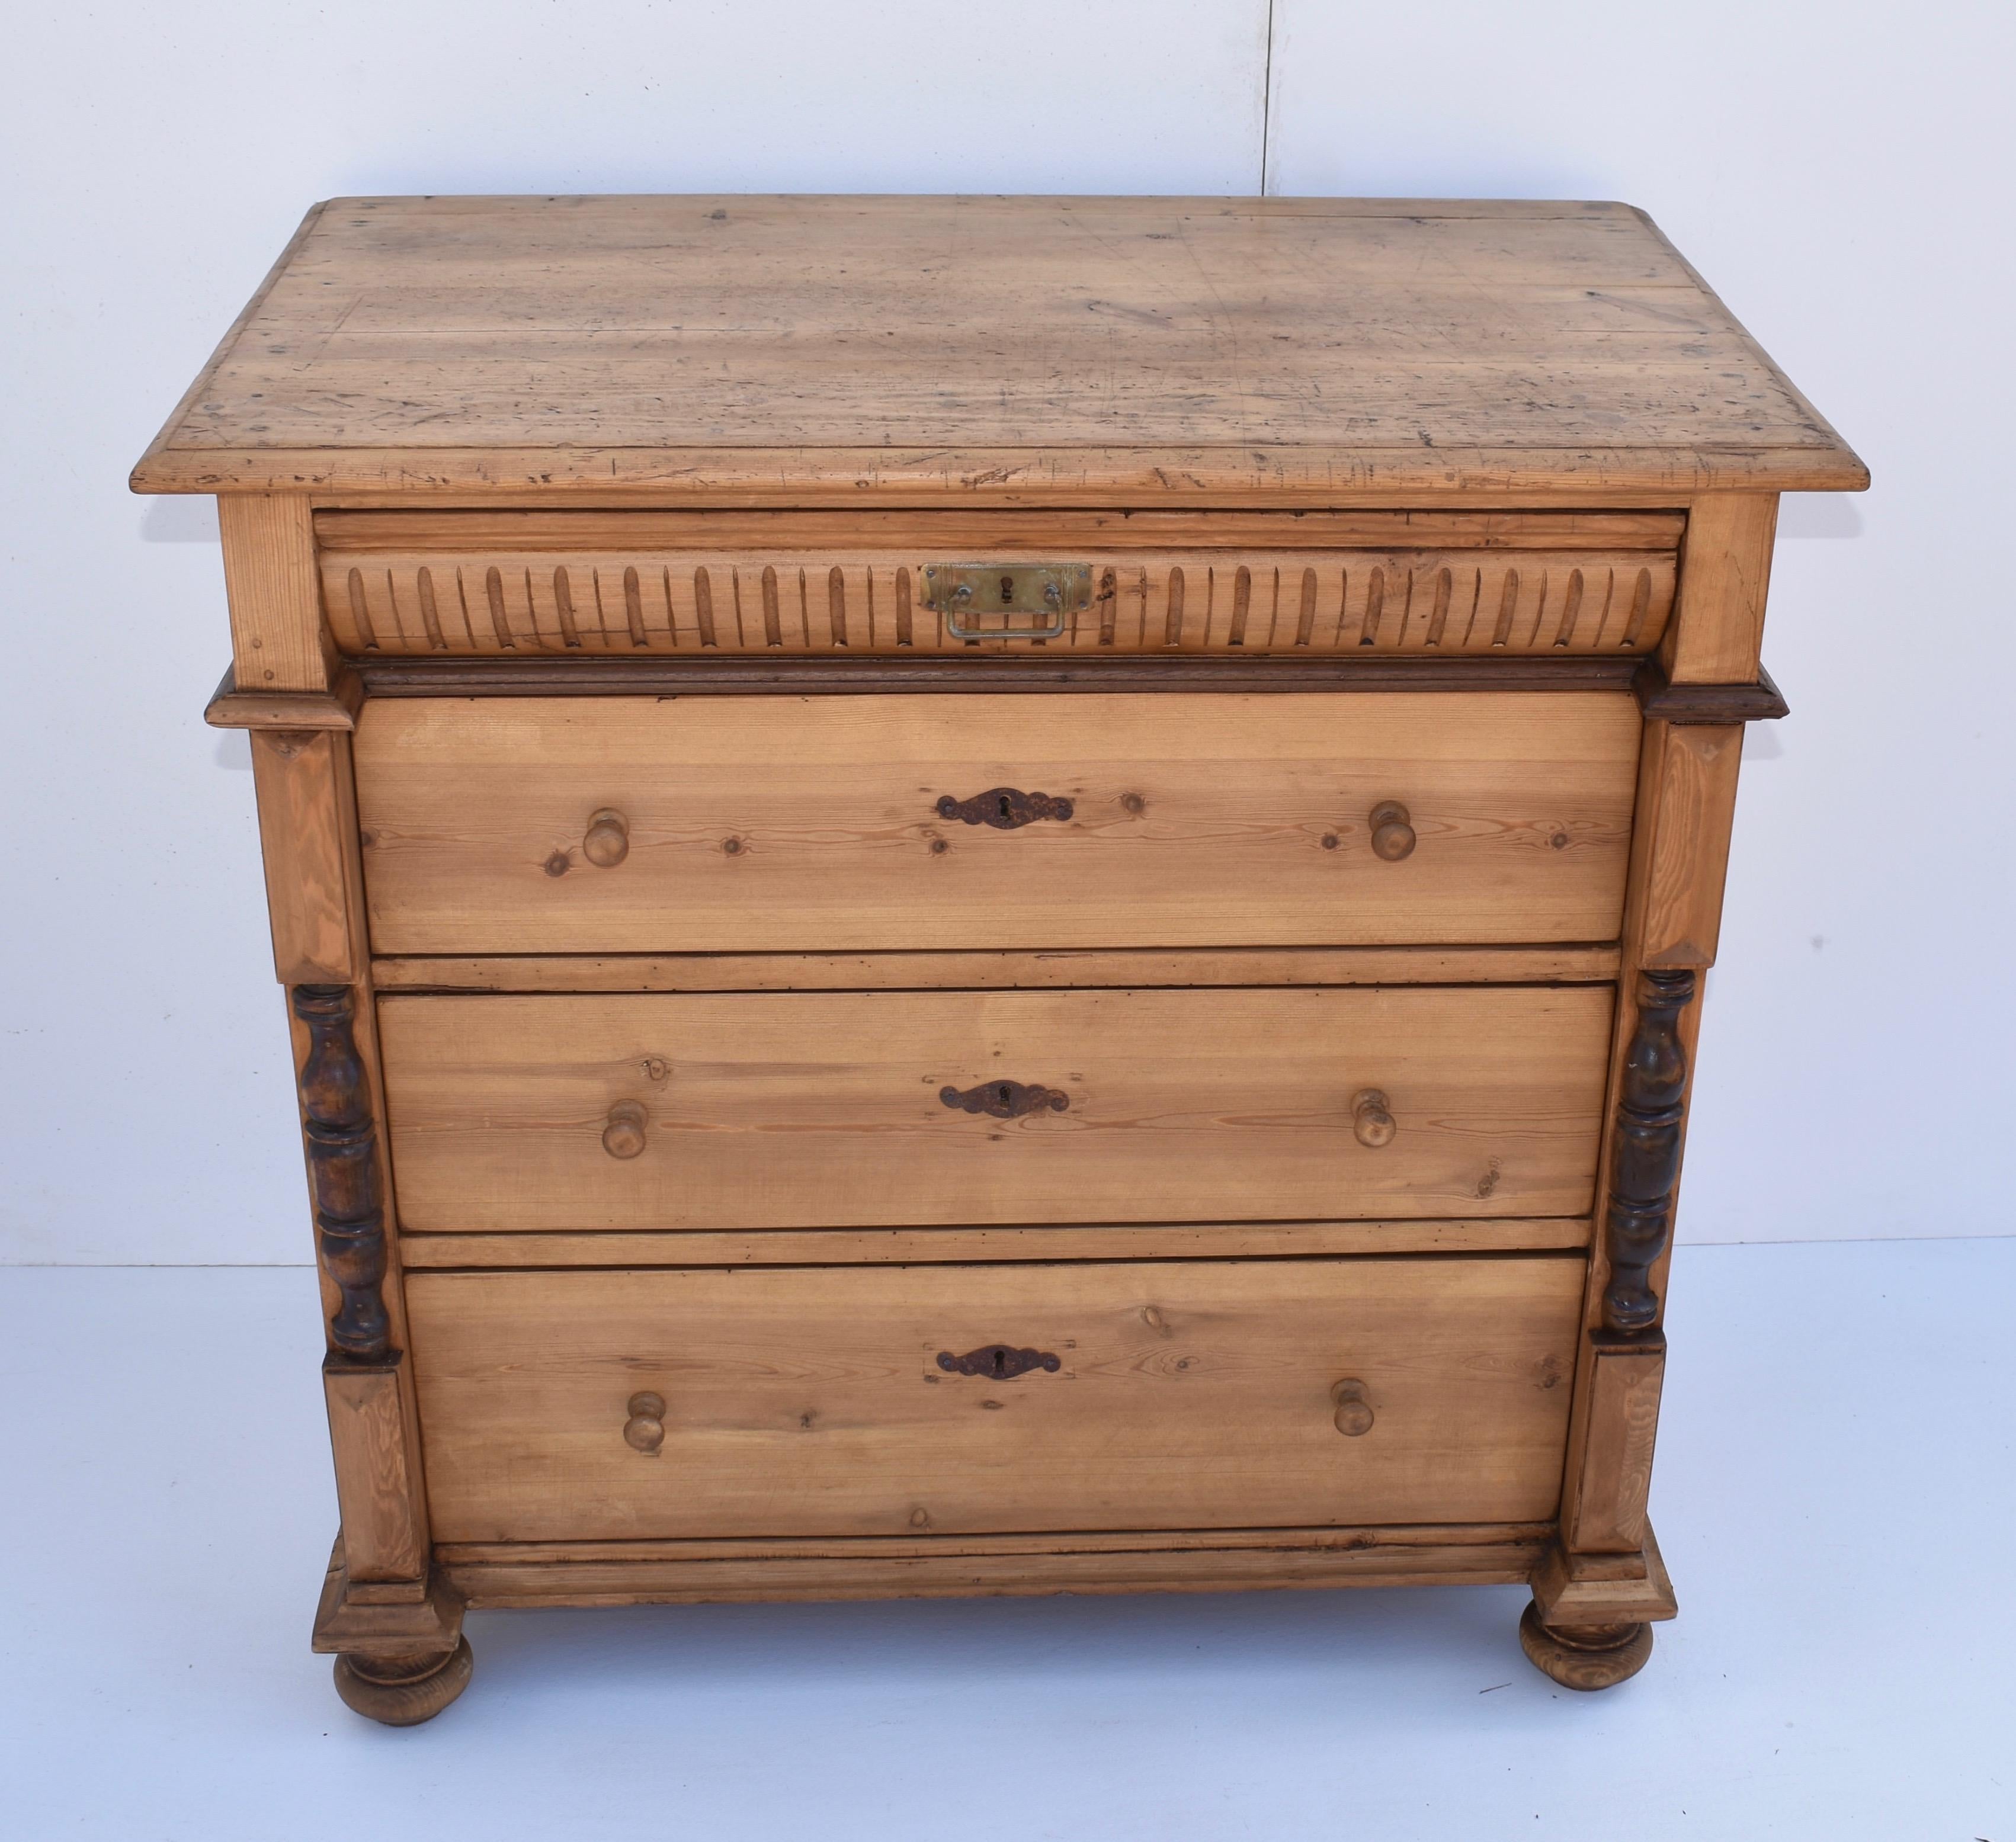 This is a lovely little Scandinavian chest of four drawers. The shallow top drawer has a convex front patterned with vertical flutes and with a single central brass bail pull. Three plain drawers follow, the bottom deeper than the others. The top